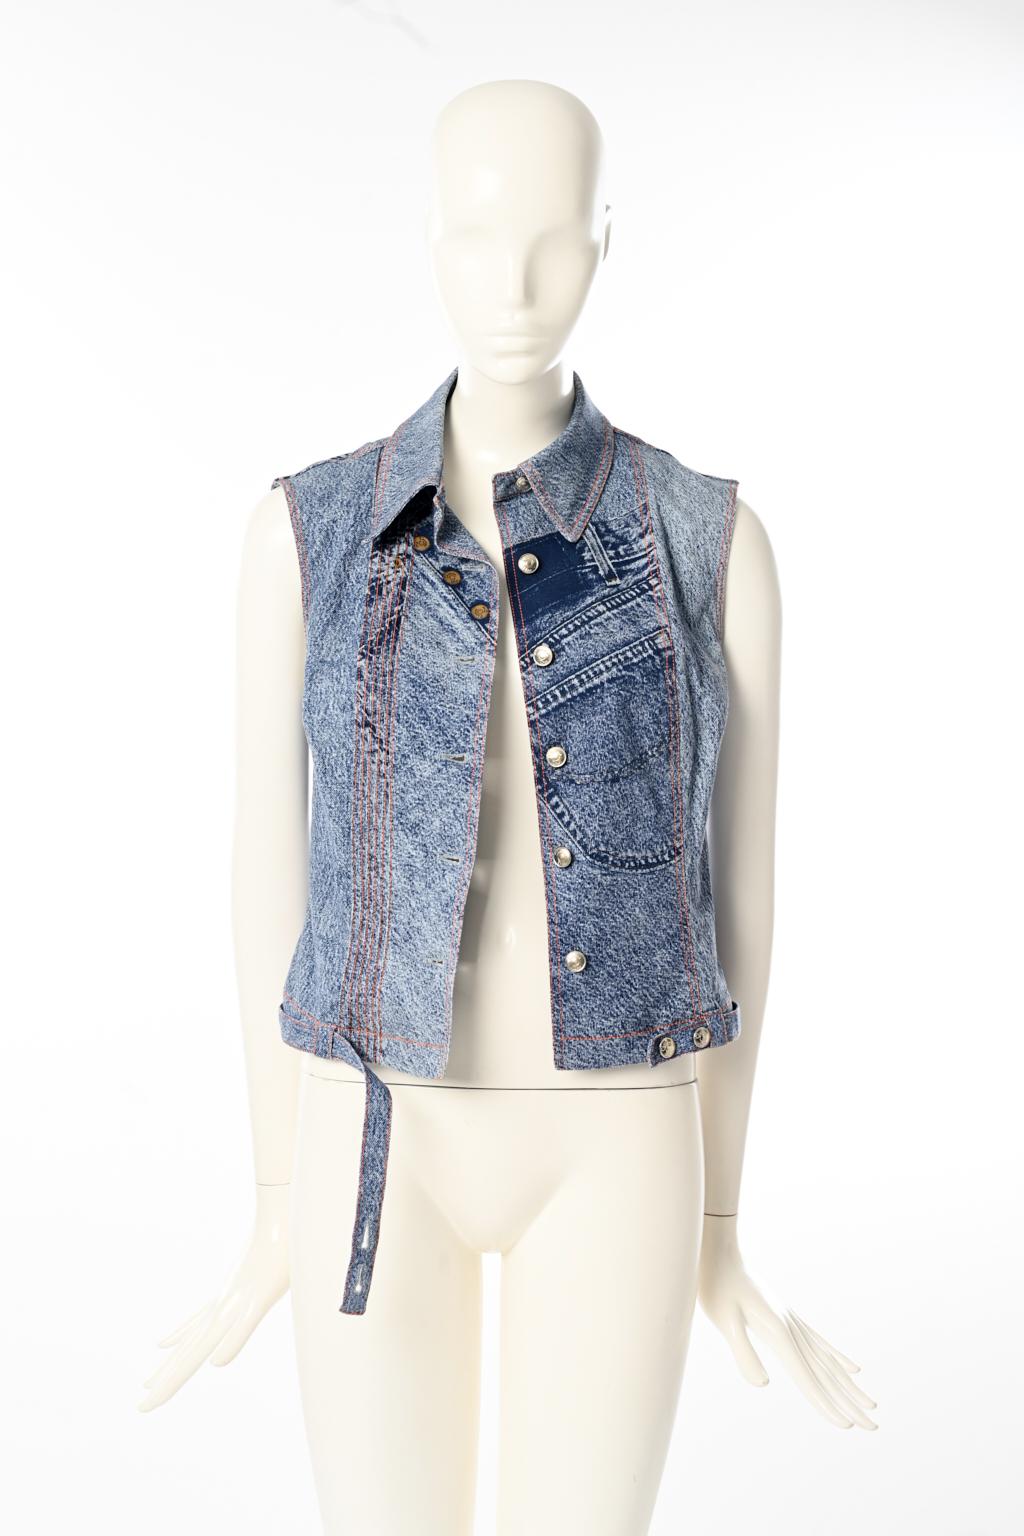 From the unmissable early 2000 John Galliano for Christian Dior collections, this trucker-inspired vest features a “trompe l’oeil” denim. Constructed in cotton with contrasting ochre topstitching, this unlined sleeveless jacket closes with silver